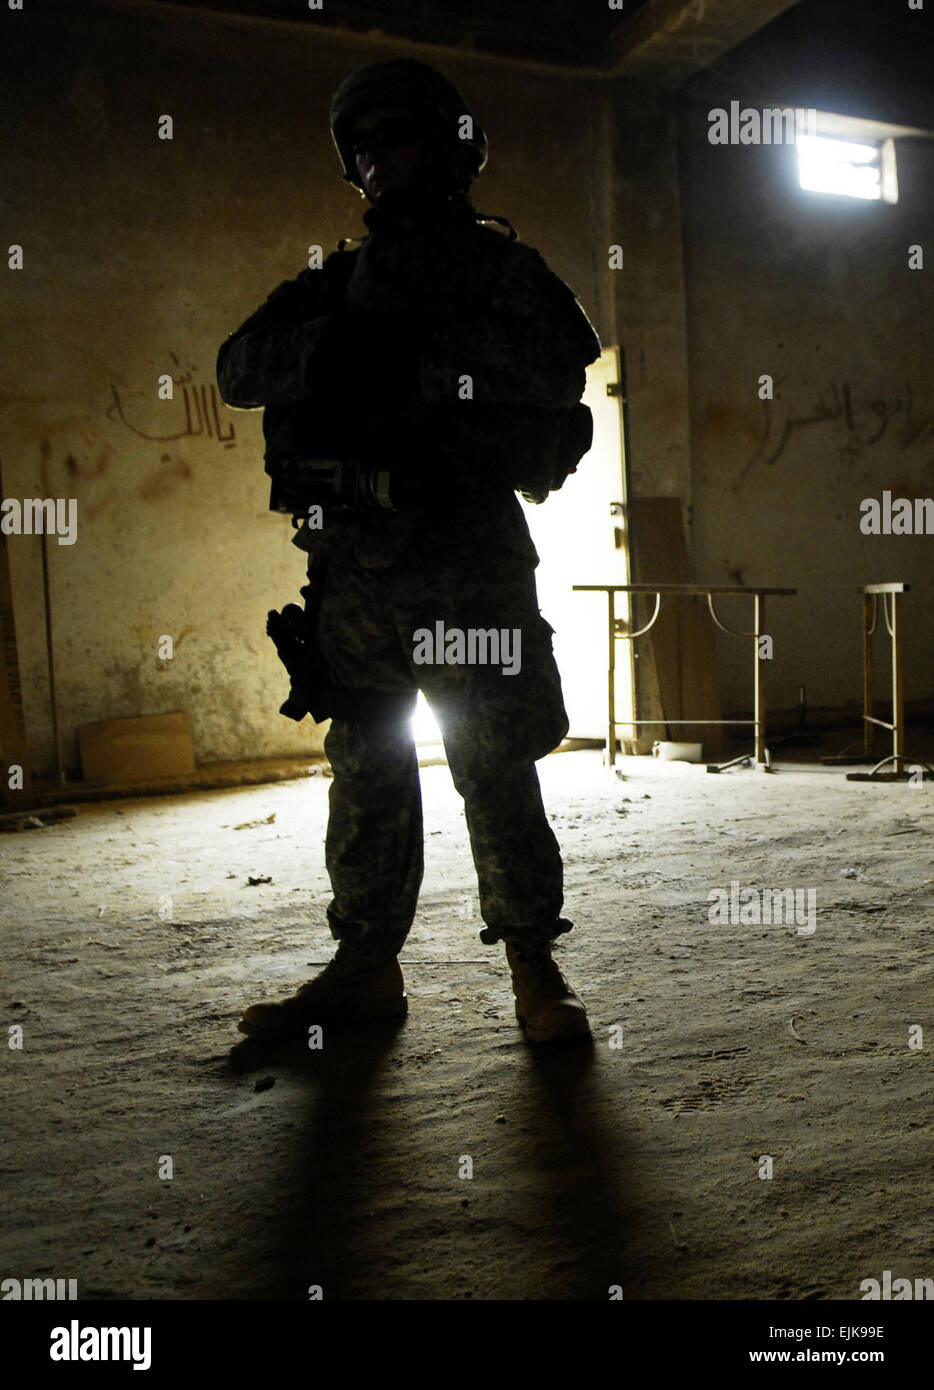 U.S. Army Spc. Jason Edwards, of 982nd Combat Camera Company Airborne, stands silhouetted during a convoy in Baqubah, Iraq, Aug. 10, 2007. The Soldiers are conducting operations in the city to capture insurgents and locate weapons caches.  Staff Sgt. Shawn Weismiller Stock Photo